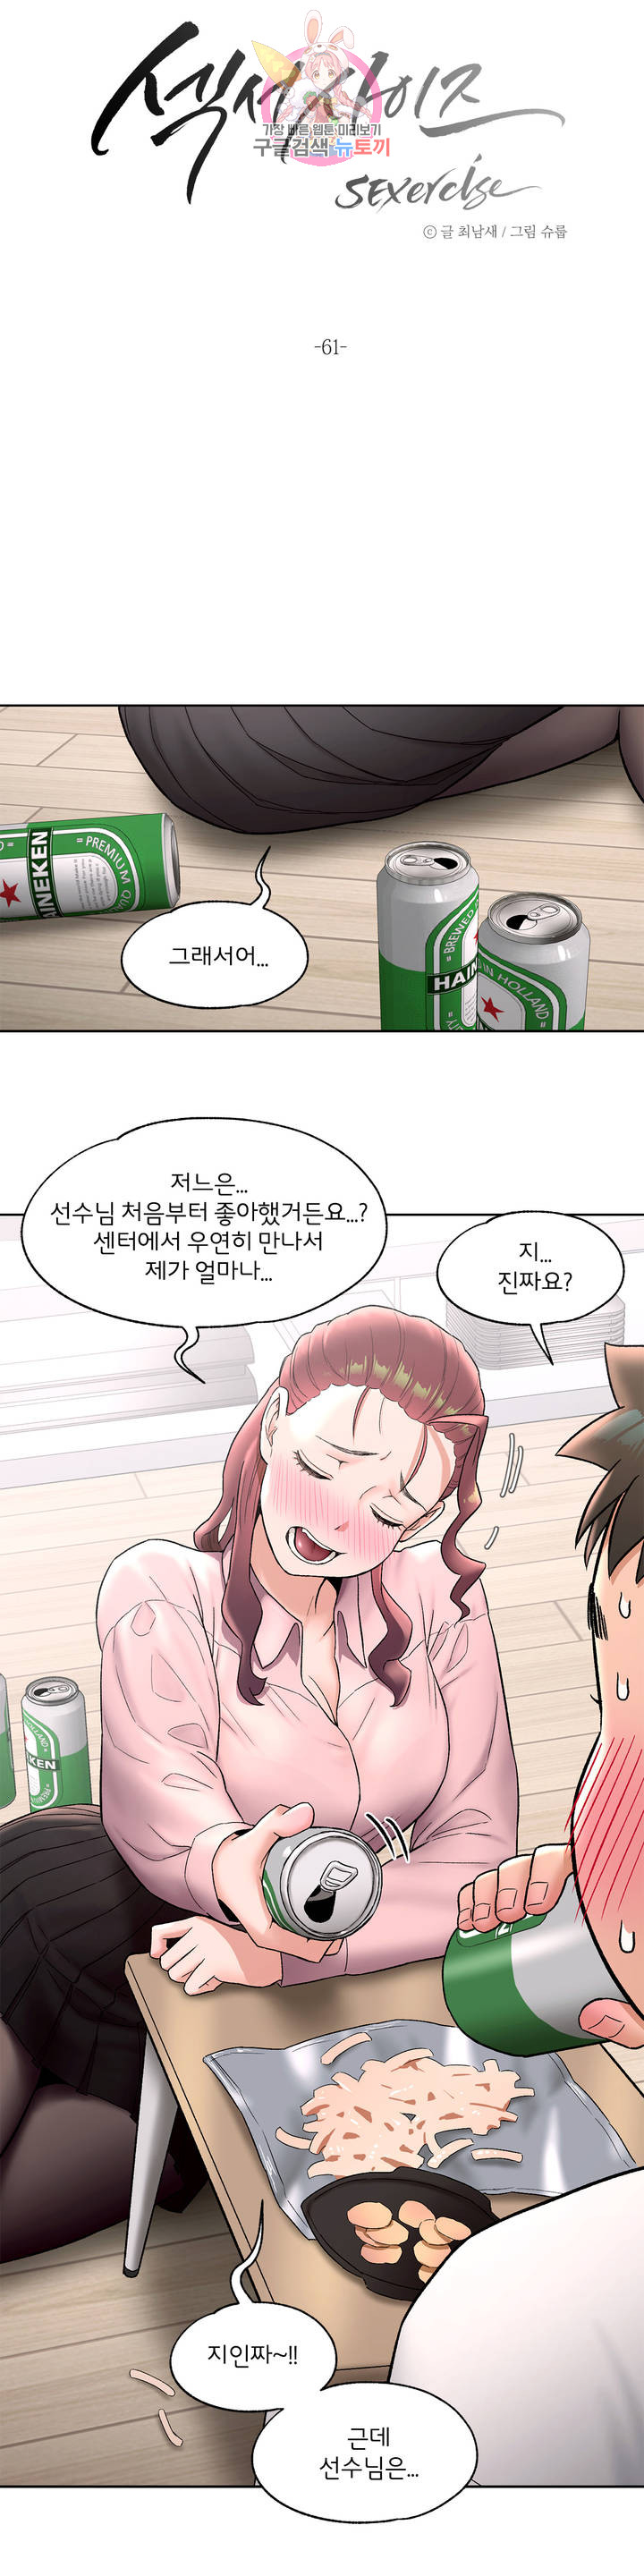 Sexercise Raw - Chapter 61 Page 4